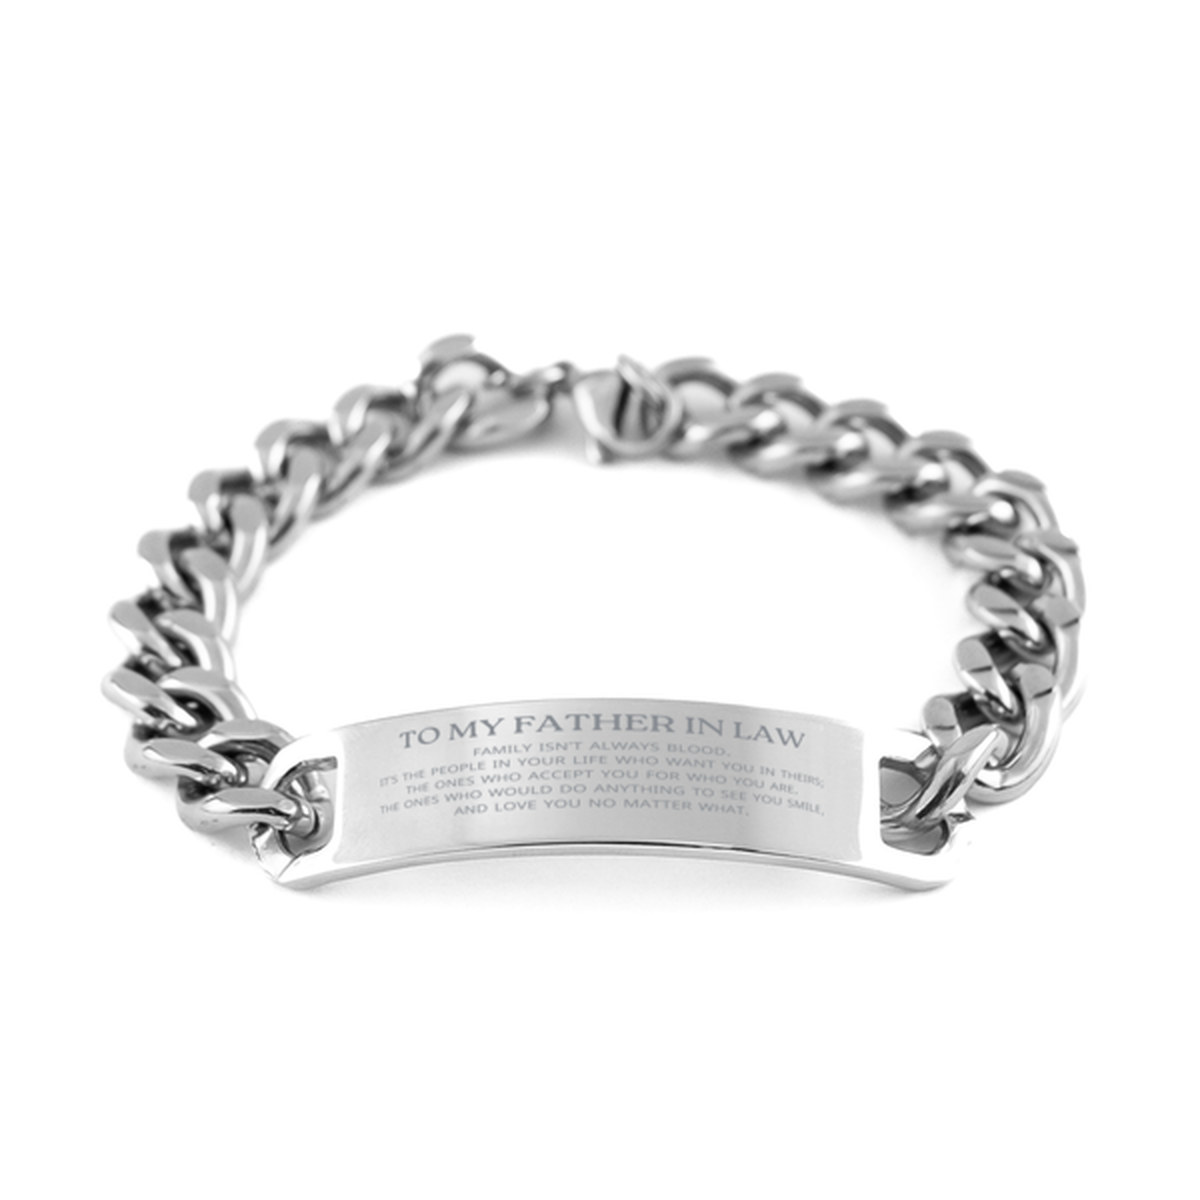 To My Father In Law Gifts, Family isn't always blood, Father In Law Cuban Chain Stainless Steel Bracelet, Birthday Christmas Unique Present For Father In Law